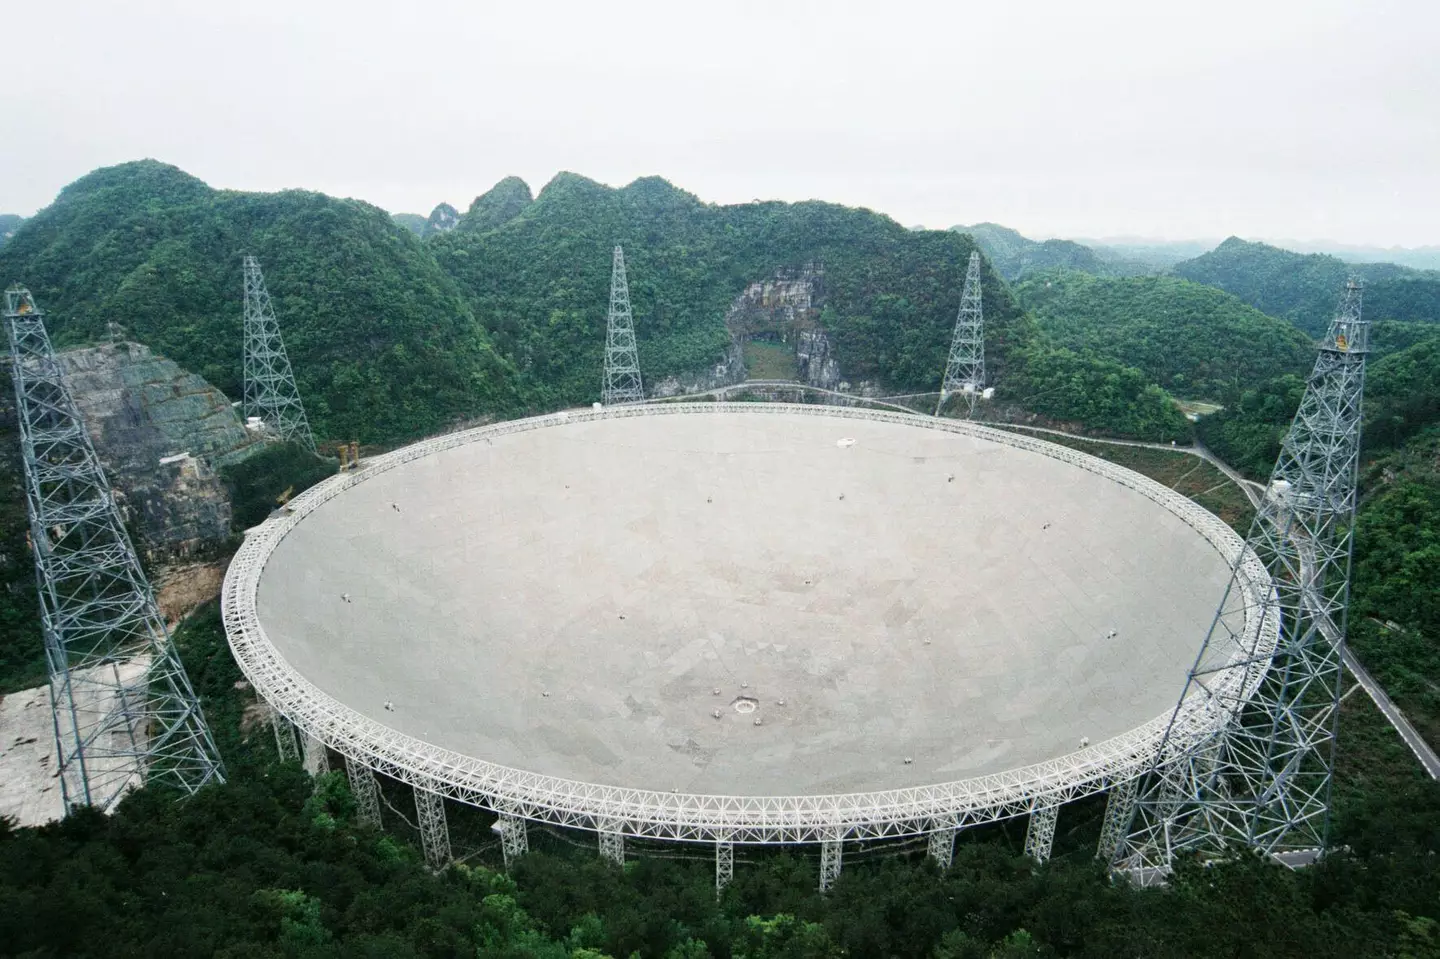 China claims to have detected alien signals using its colossal Sky Eye telescope.